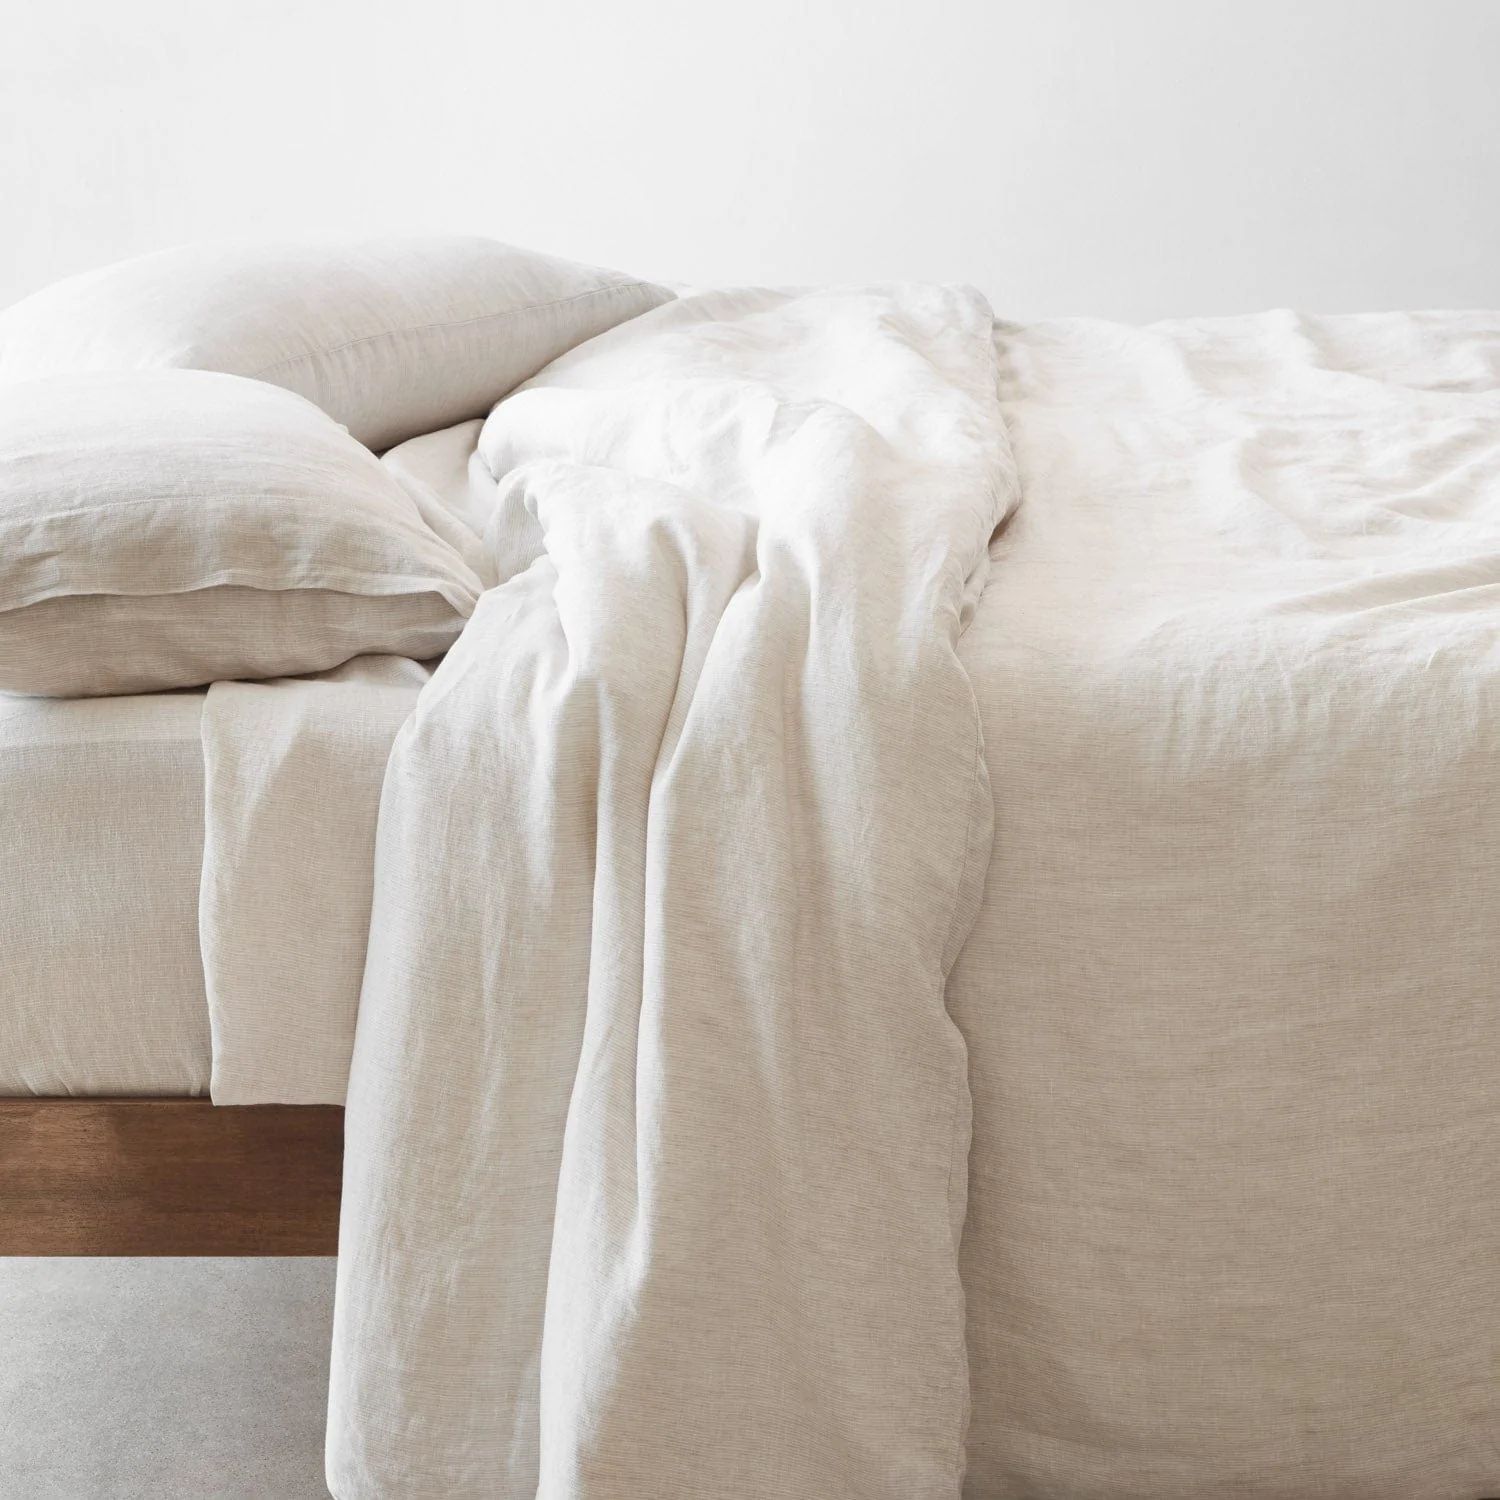 Stonewashed Linen Duvet Covers | Available in 8 Colors   – The Citizenry | The Citizenry